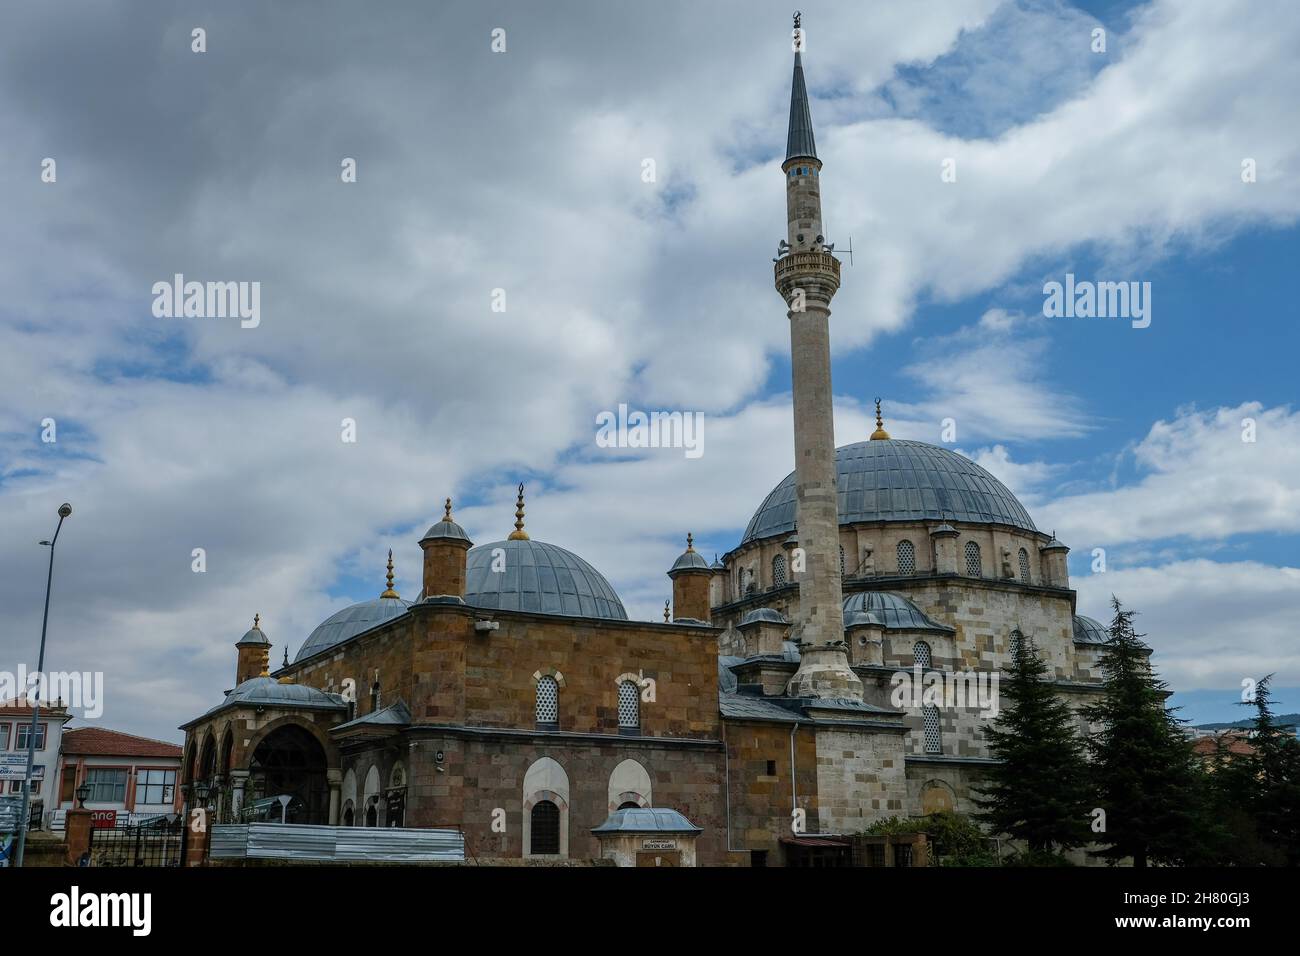 Capanoğlu Mosque, which is popularly known as the Great Mosque or Ulucami, is one of the important examples of the Turkish architectural style in Anat Stock Photo